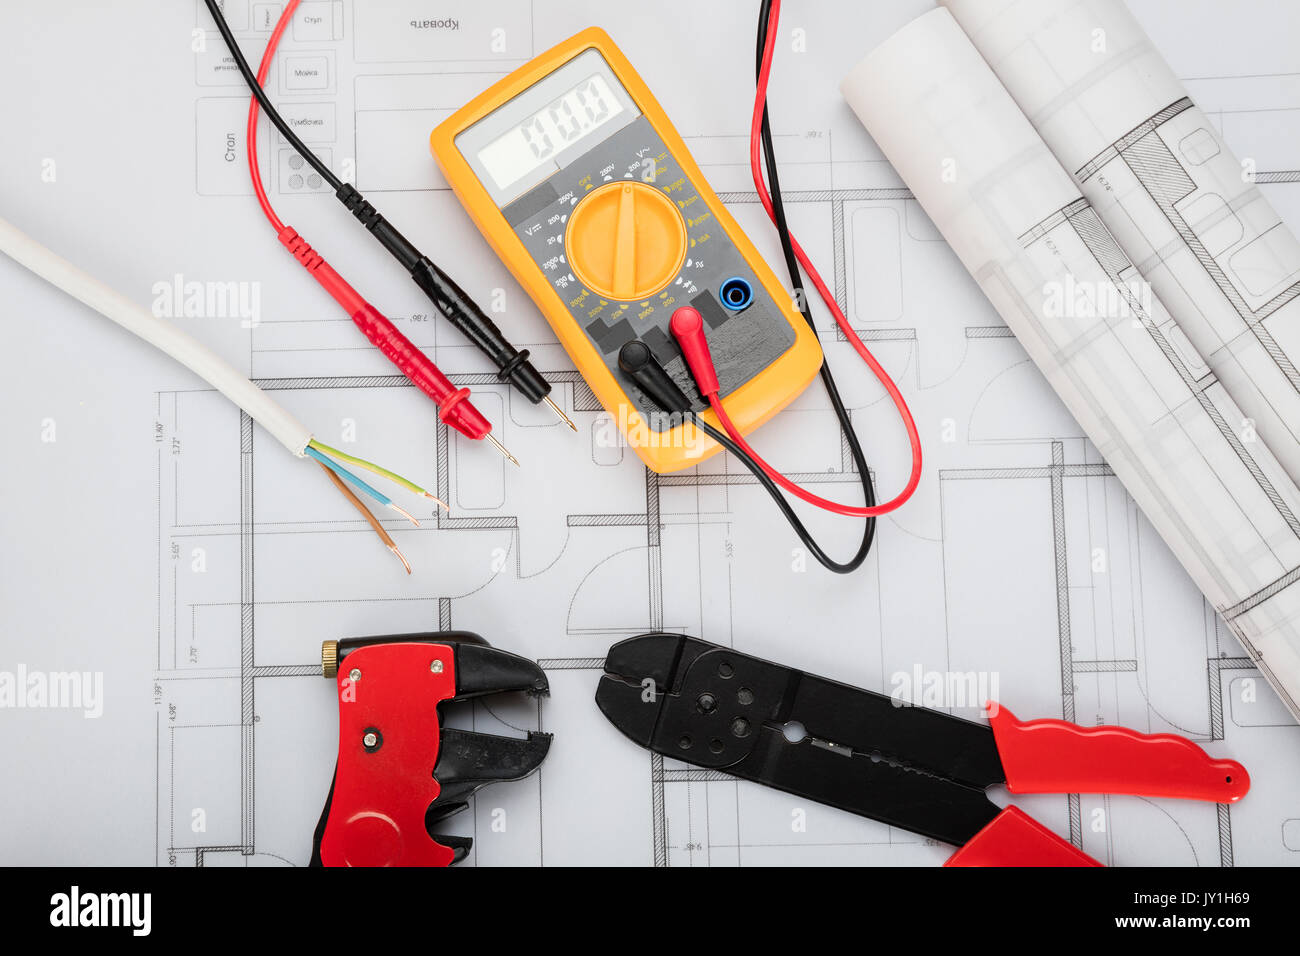 High Angle View Of Electrical Components Arranged On Plans Stock Photo